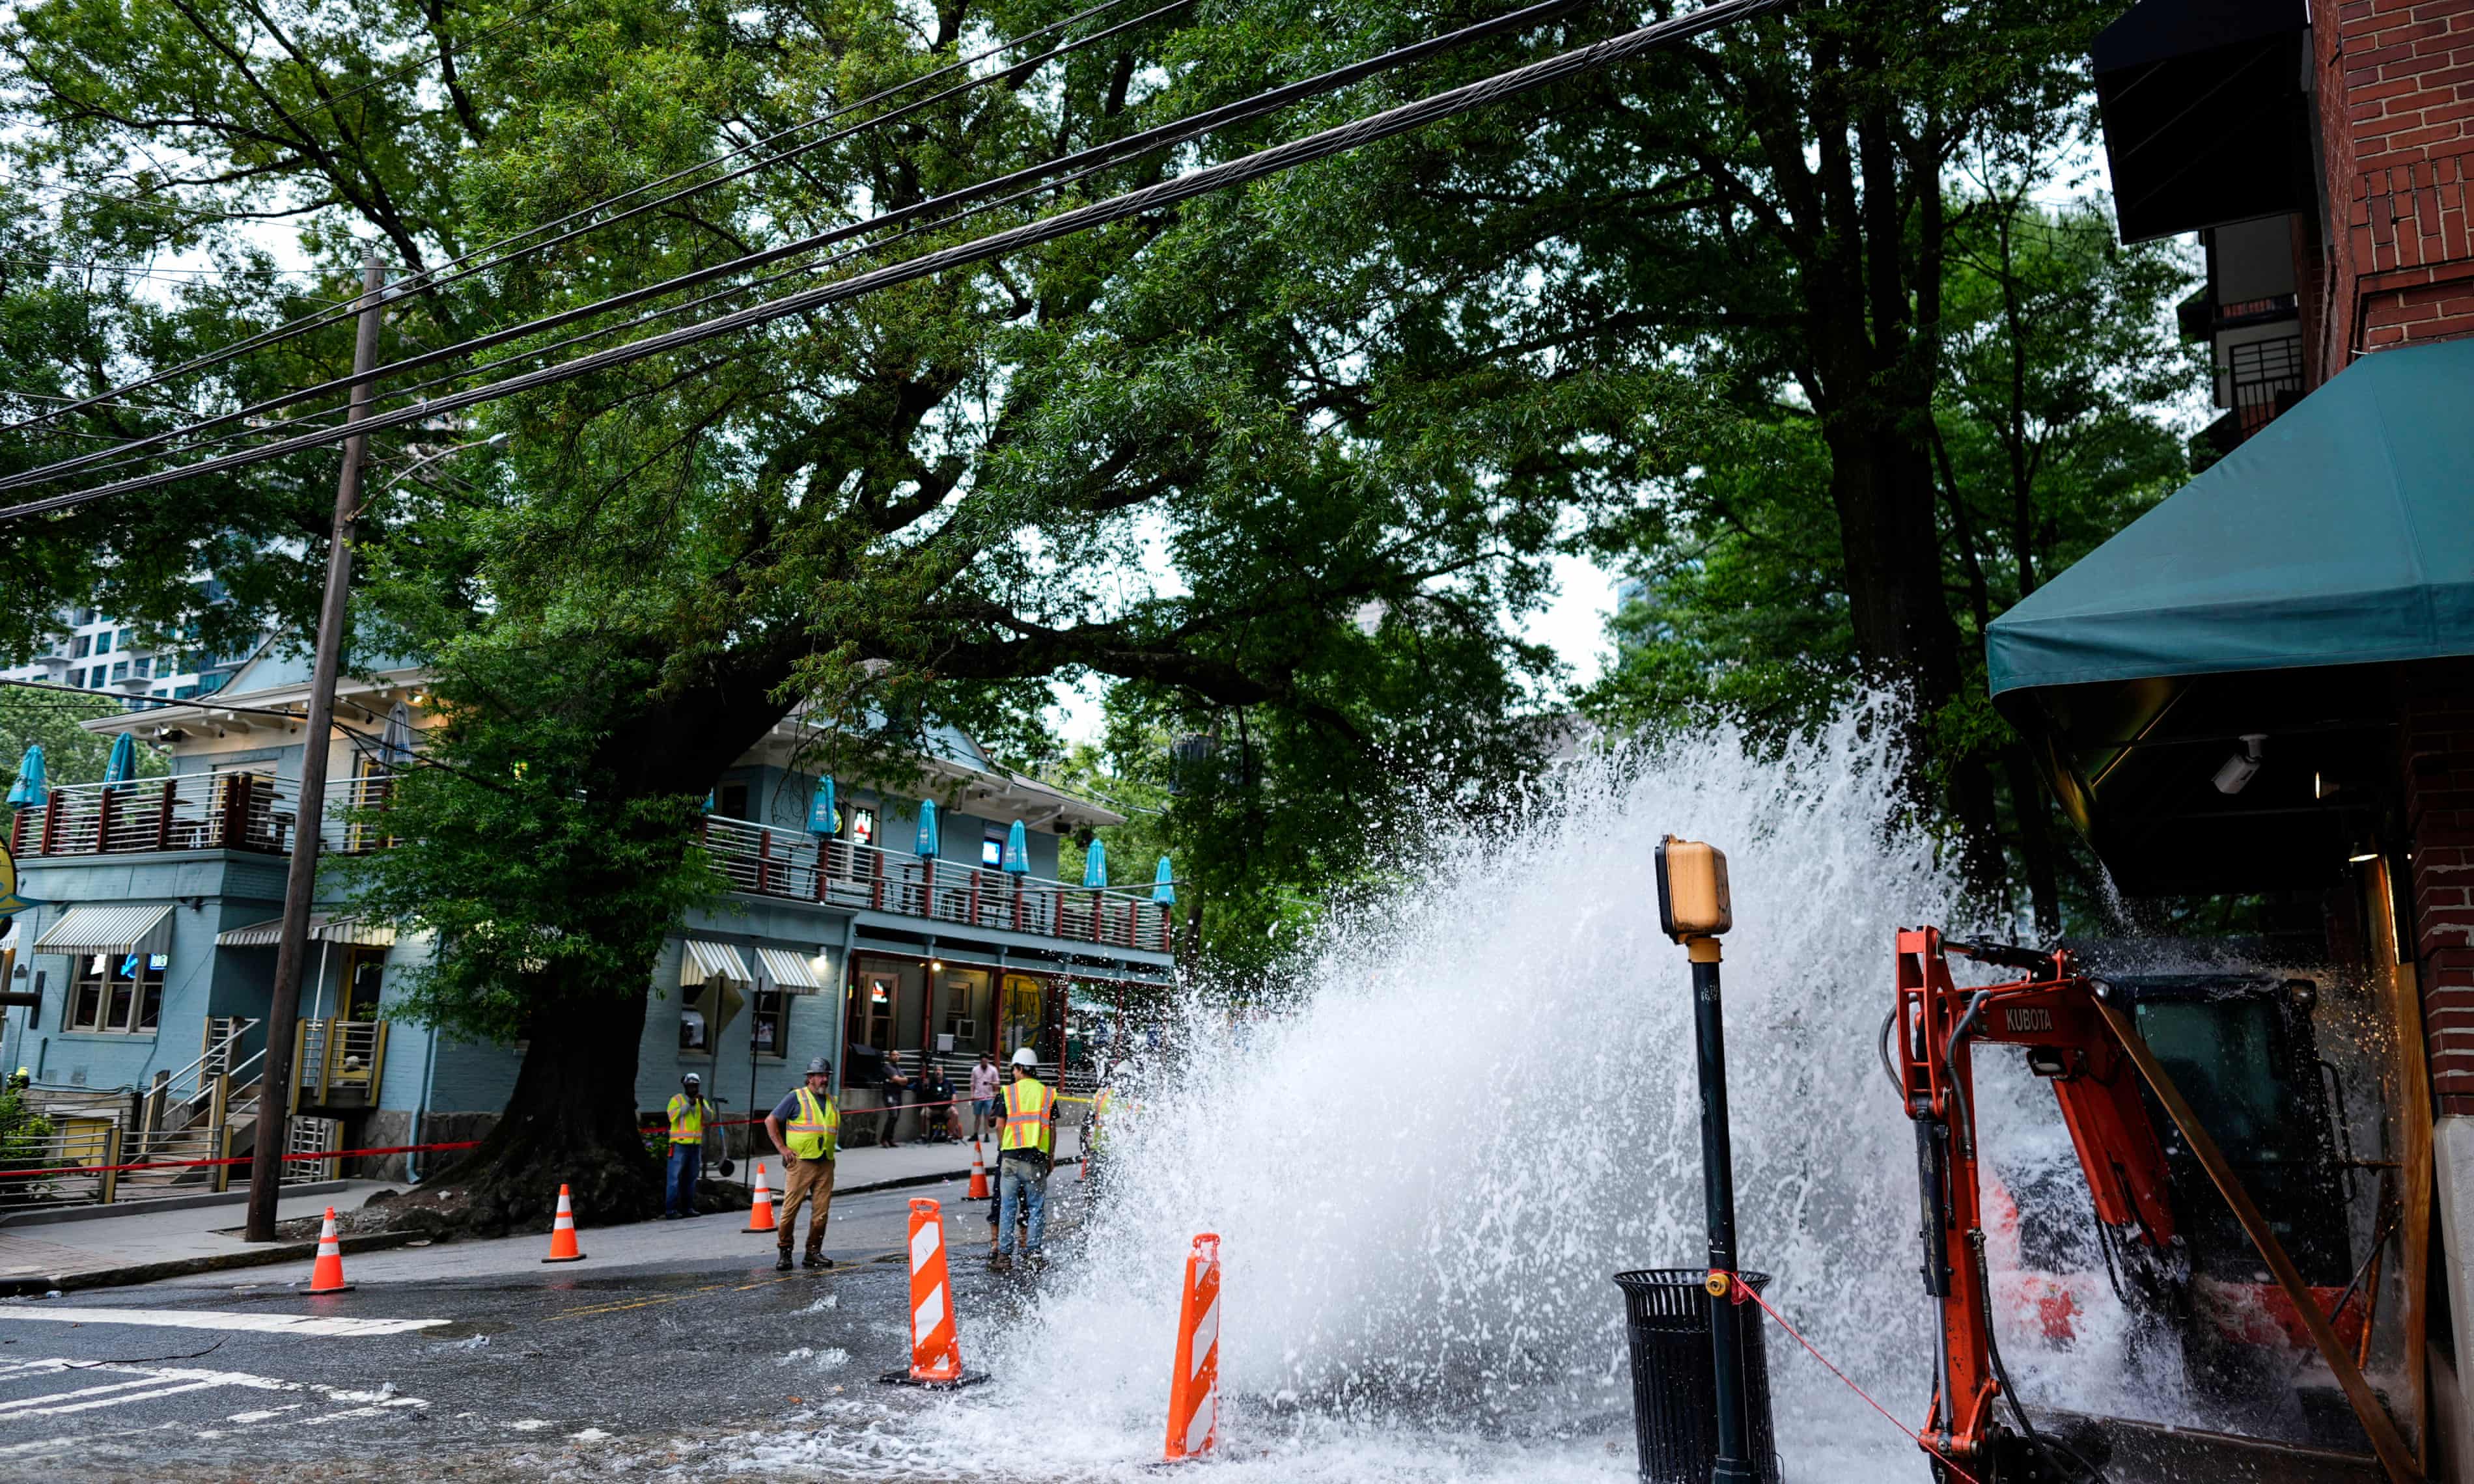 Water pipes burst in Atlanta, causing major outages and disruptions (theguardian.com)